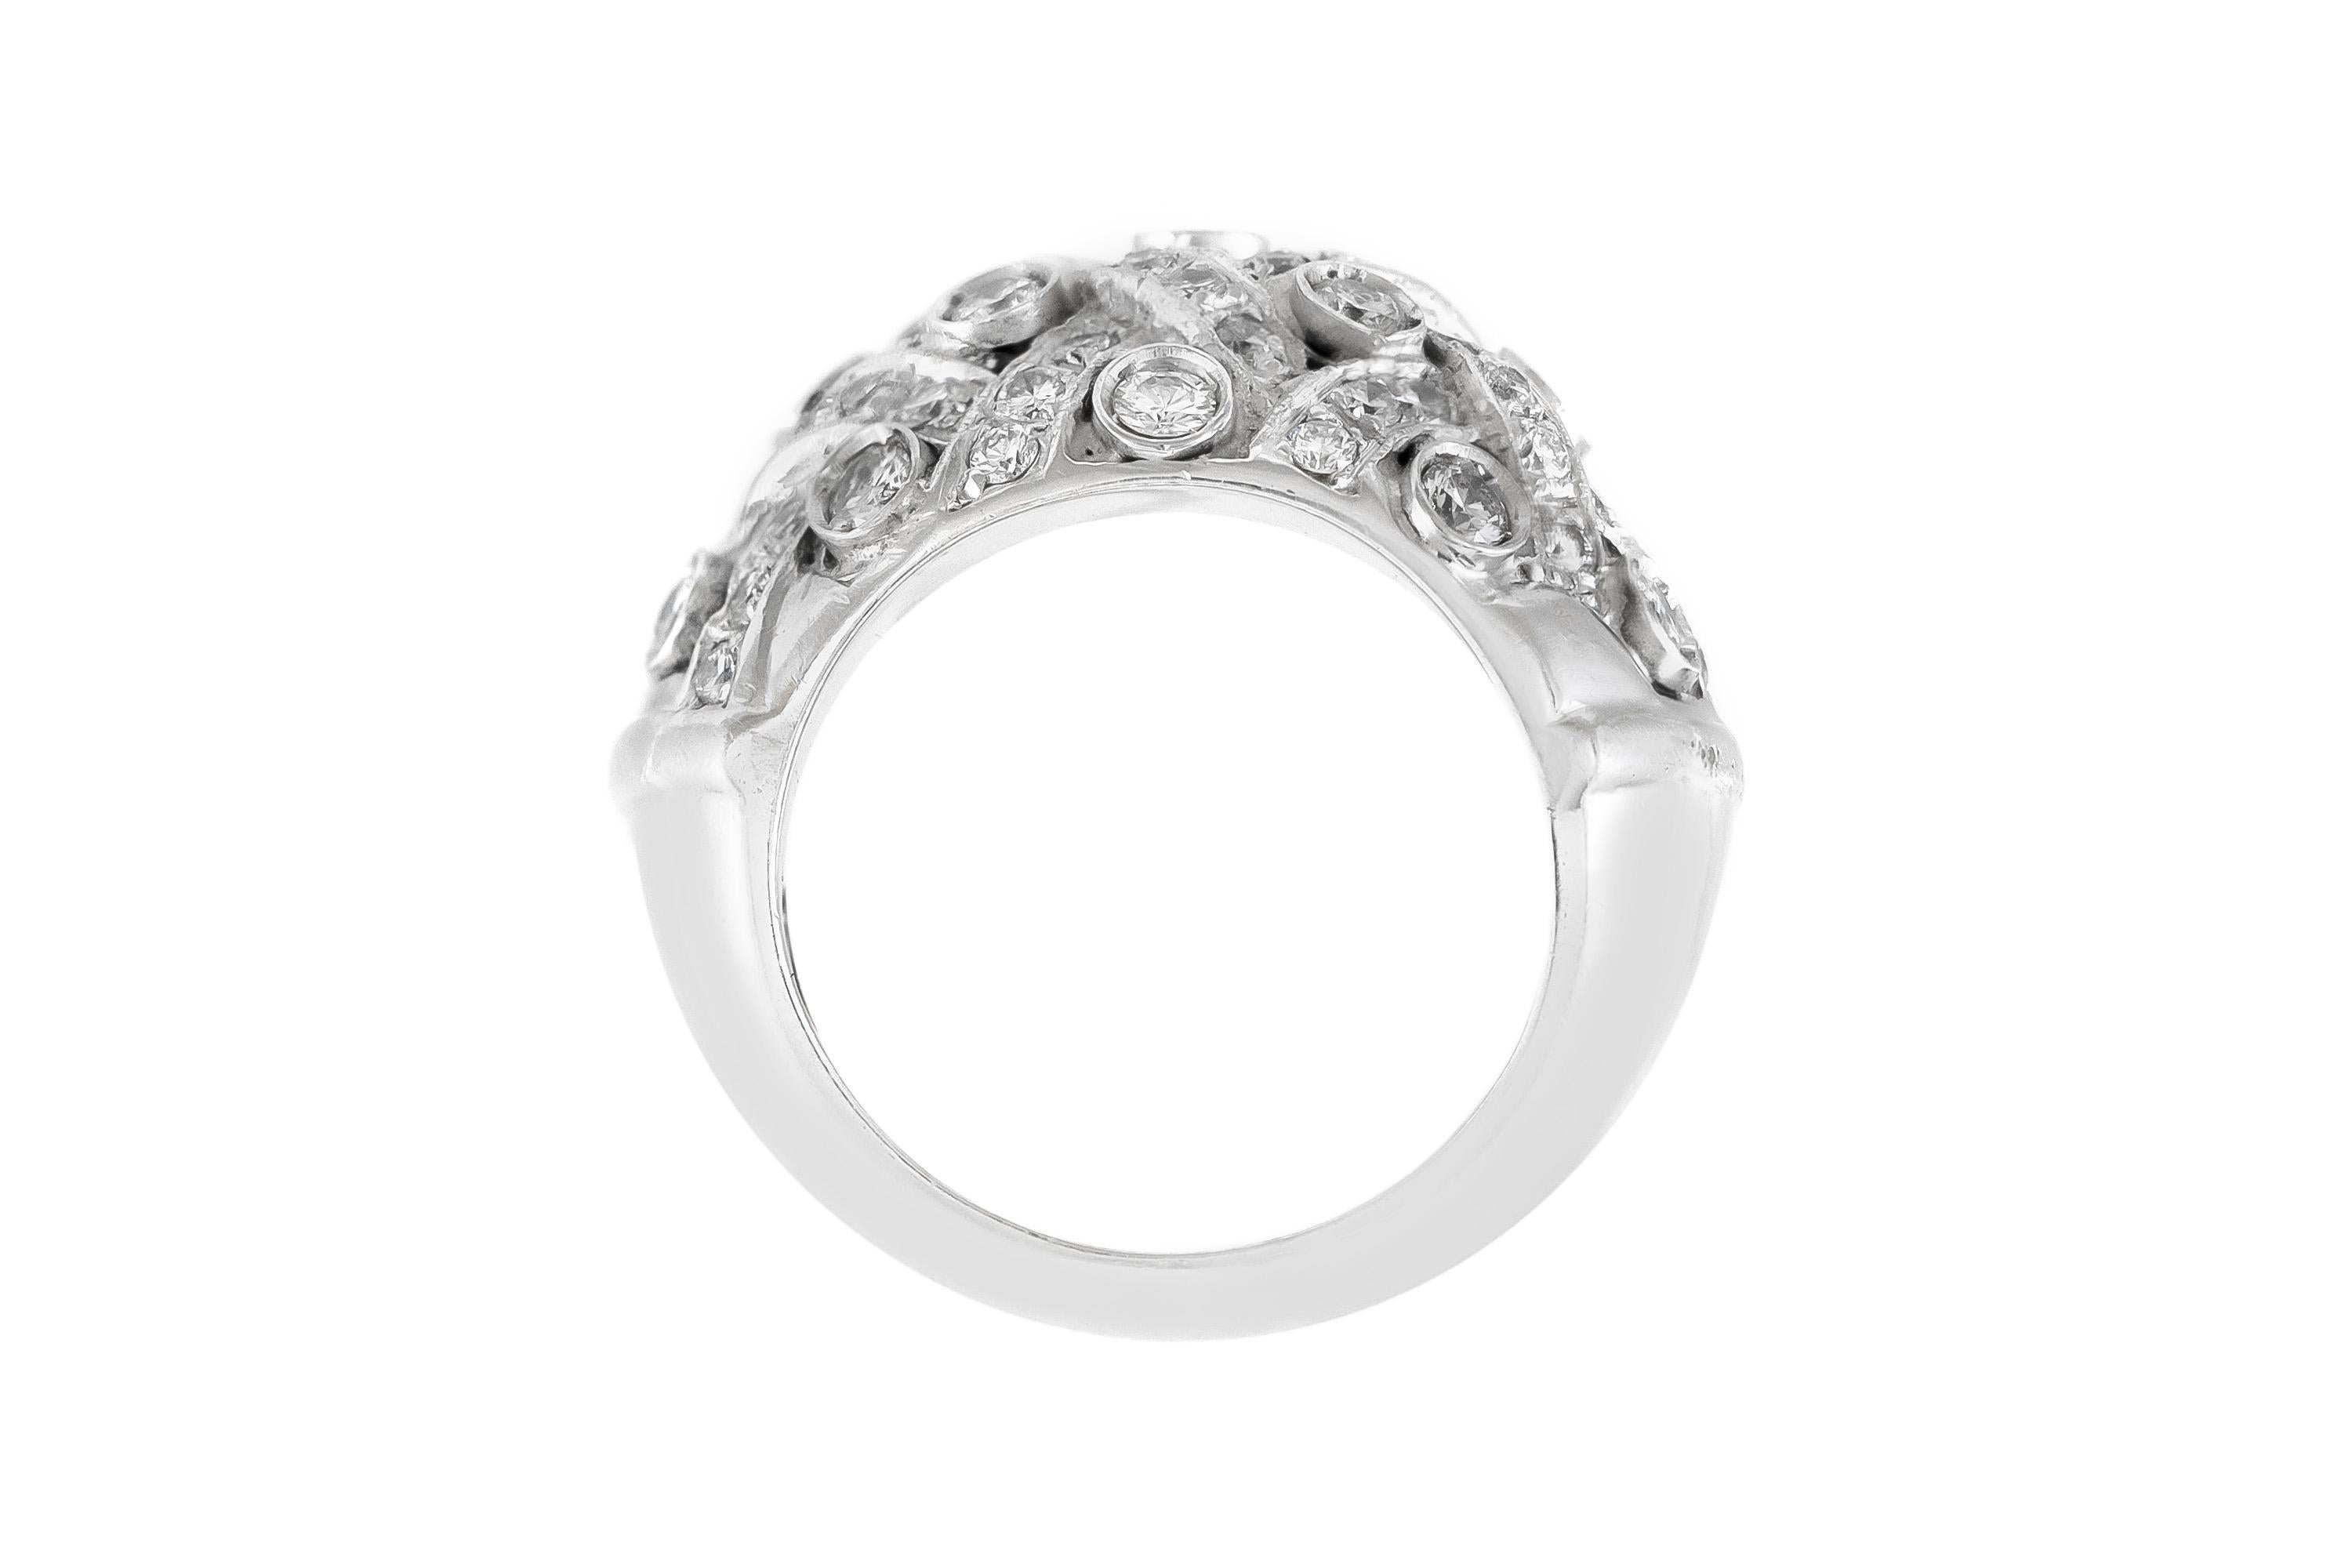 The ring is finely crafted in 18k white gold with diamonds weighing approximately total of 3.40 carat.
Size 5.50 ( easy to resize )
Circa 1980